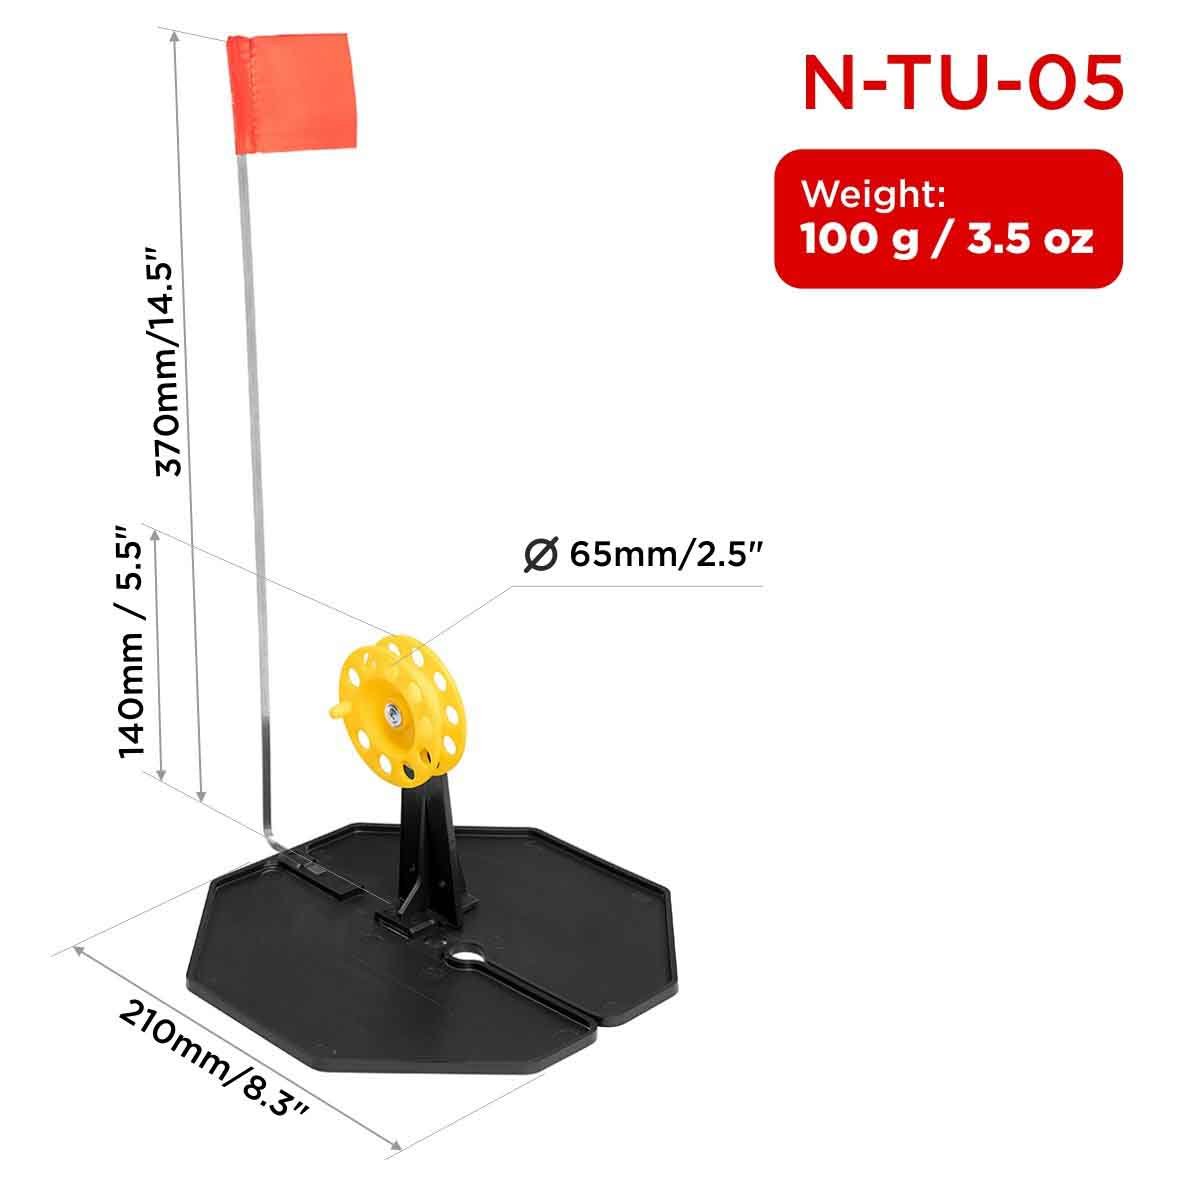 Tip-up Pop-Up Integrated Hole-Cover Easy to Clip N-Tu-05 weighs 3.5 oz, the base is 8.3 inches long, the flag shaft is 14.5 inches, the spool diameter is 2.5 inches and its height is 5.5 inches